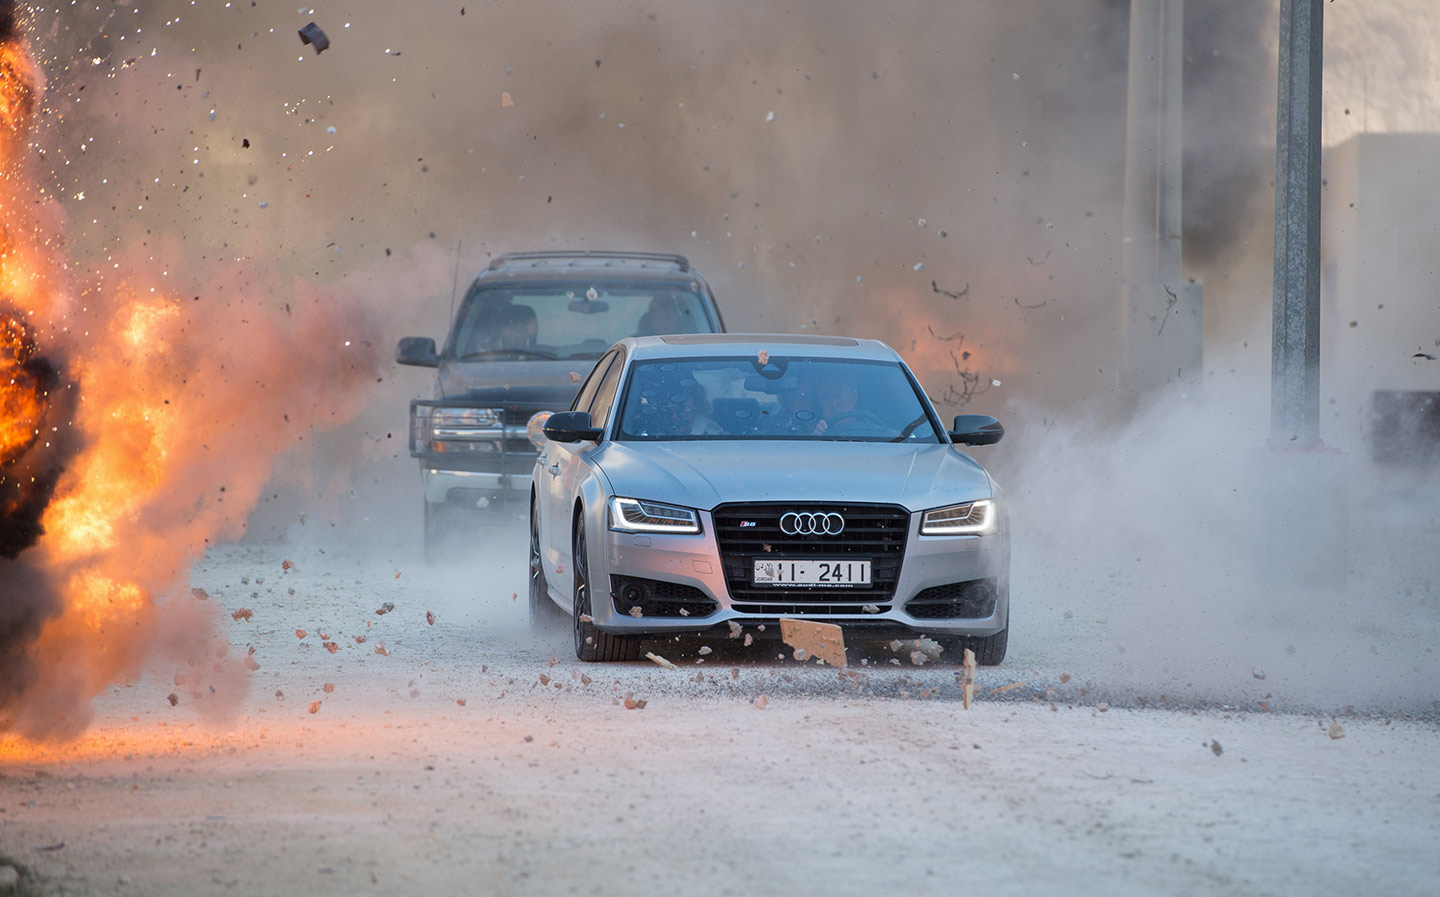 APOCALYPSE WOW The Grand Tour team put the pedal to the metal to avoid an explosion in Jordan